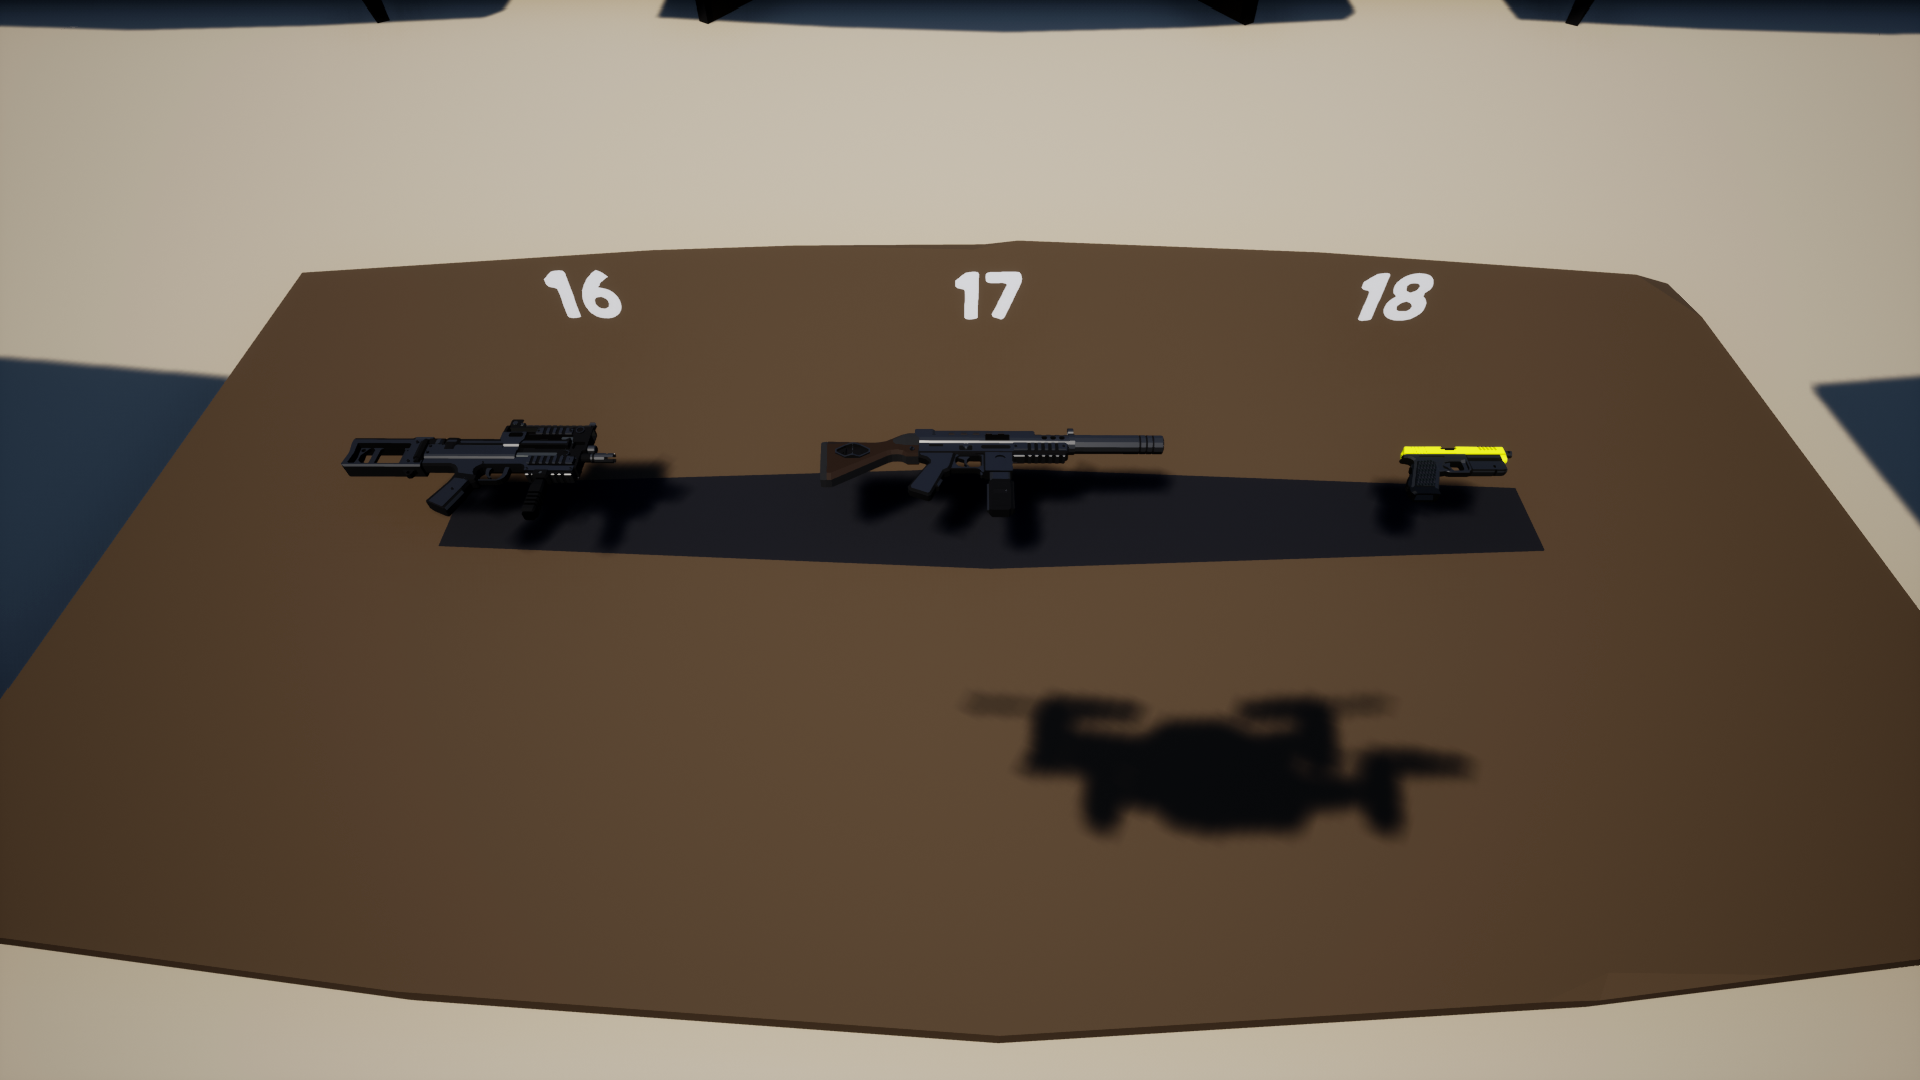 Perfect Heist 2 Level Editor Weapon Variant Selection - Weapons 16, 17, 18. - 9FC6A87